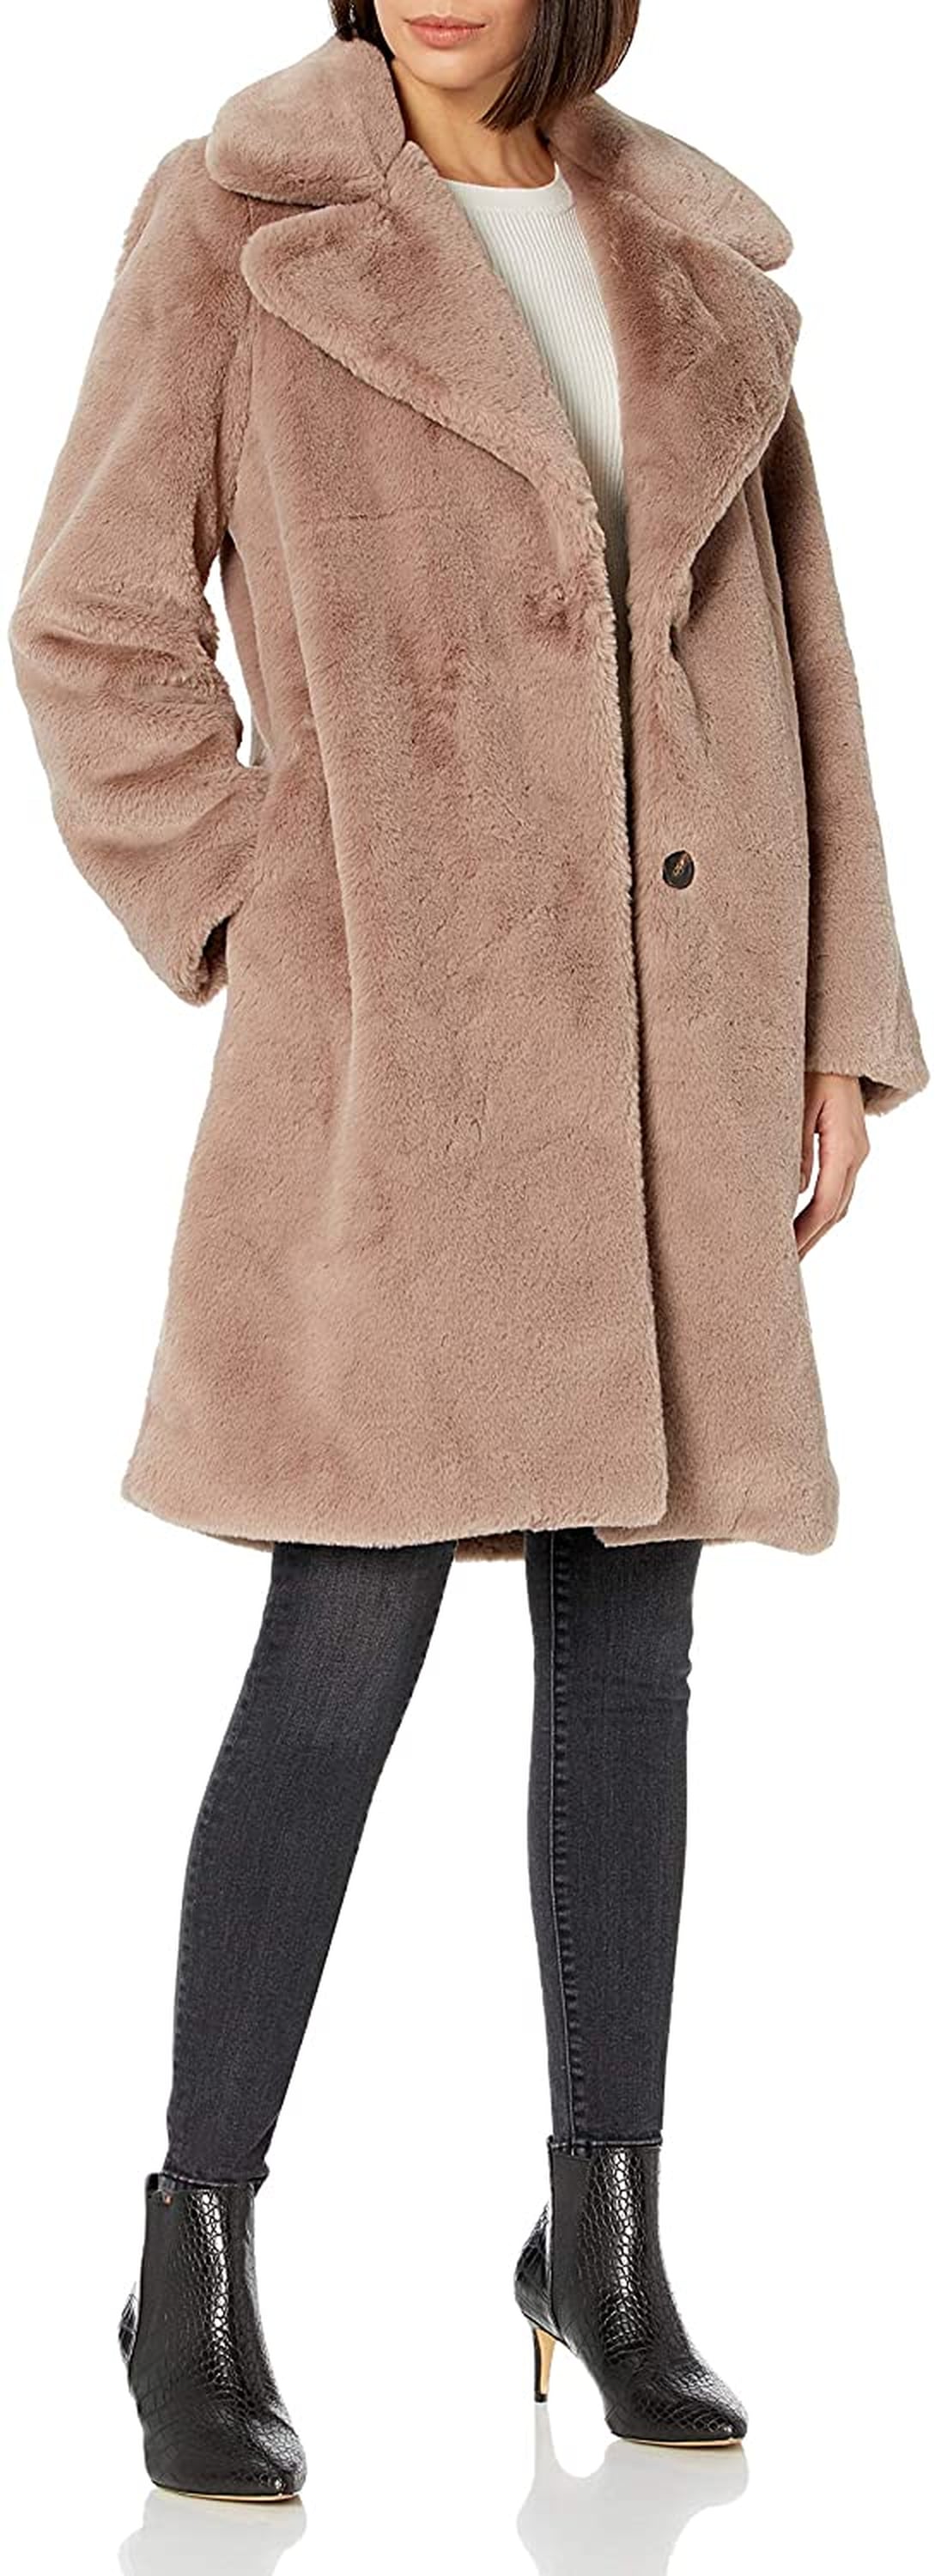 Most Comfortable Furry Coat From Amazon | Editor Review | POPSUGAR Fashion